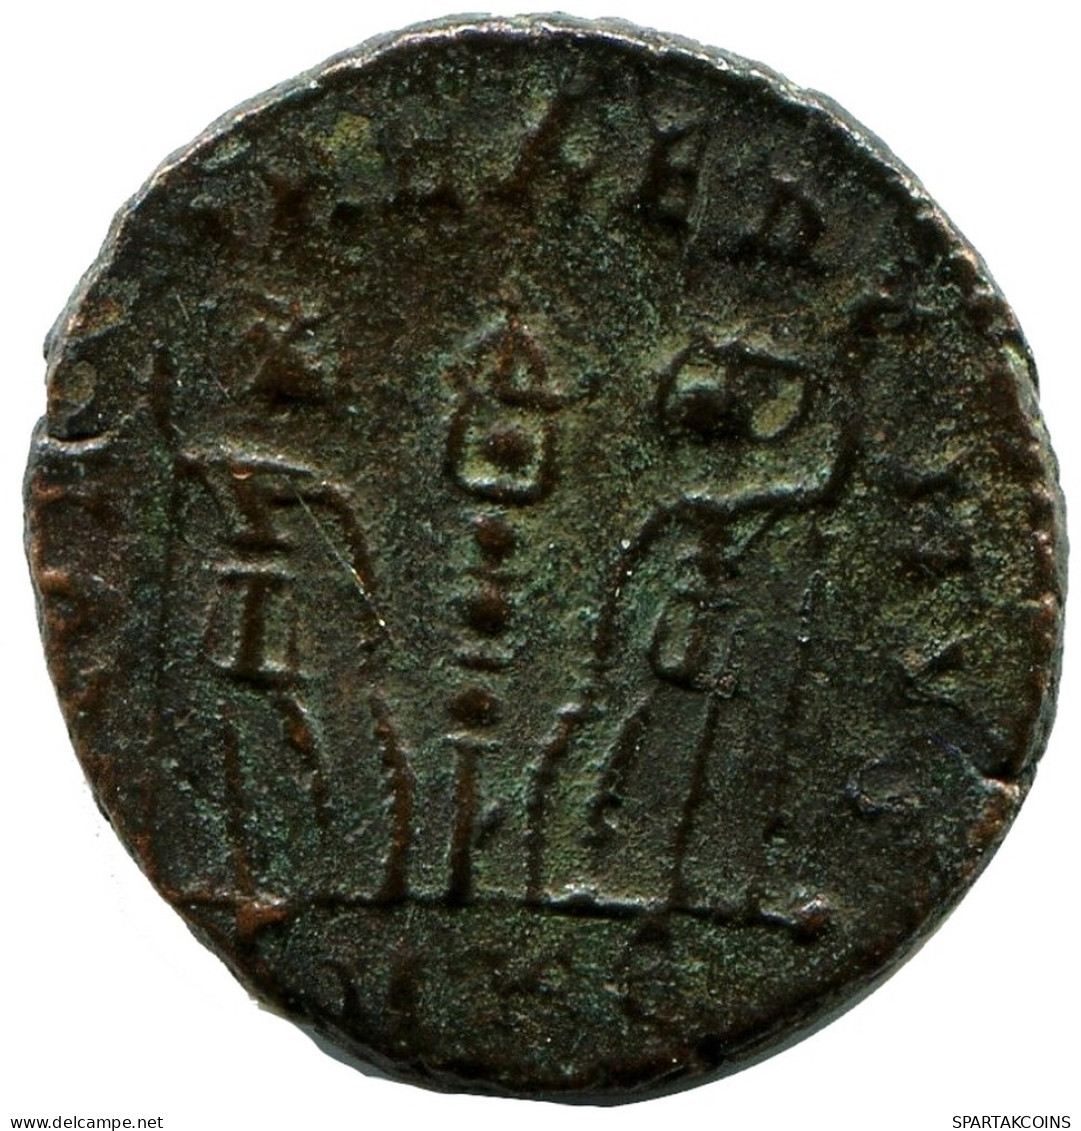 CONSTANS MINTED IN CYZICUS FOUND IN IHNASYAH HOARD EGYPT #ANC11674.14.F.A - The Christian Empire (307 AD Tot 363 AD)